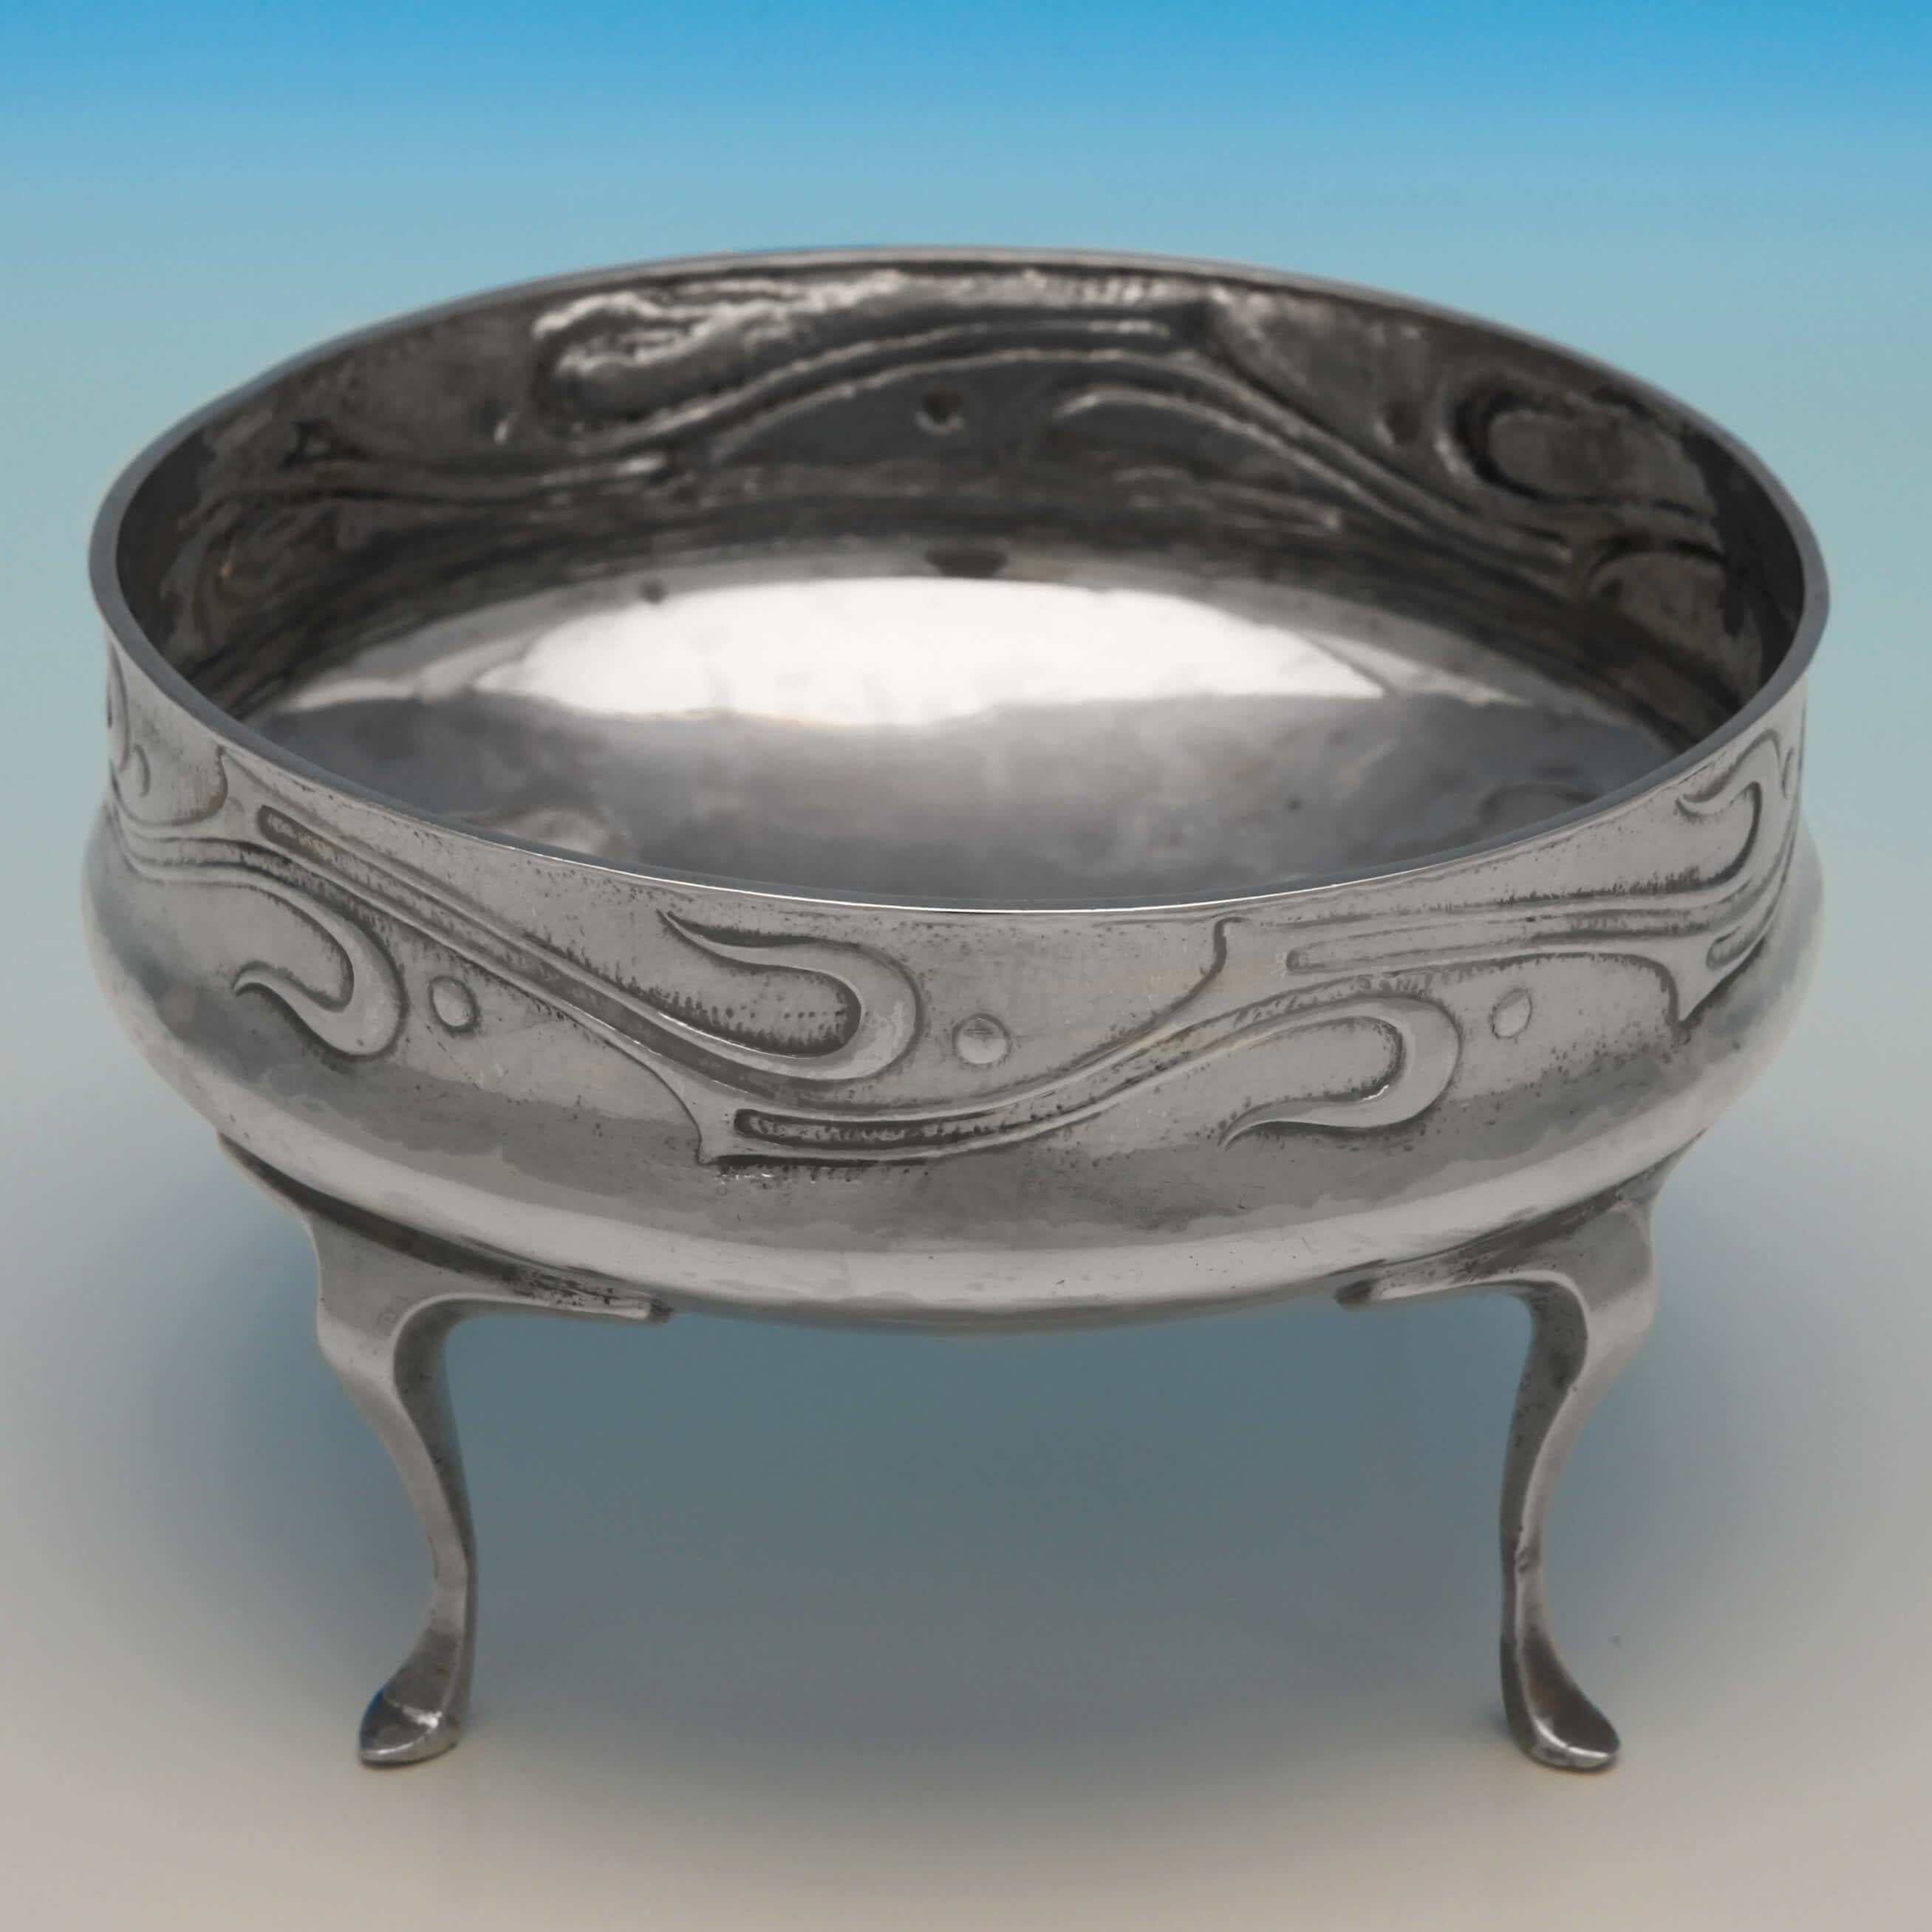 Hallmarked in London in 1900 by Liberty & Co. This fantastic and collectible Antique, Edwardian Sterling Silver Bowl, is a design attributed to Archibald Knox entitled 'The Maya', and is an early part of the Cymric range of silver he designed for